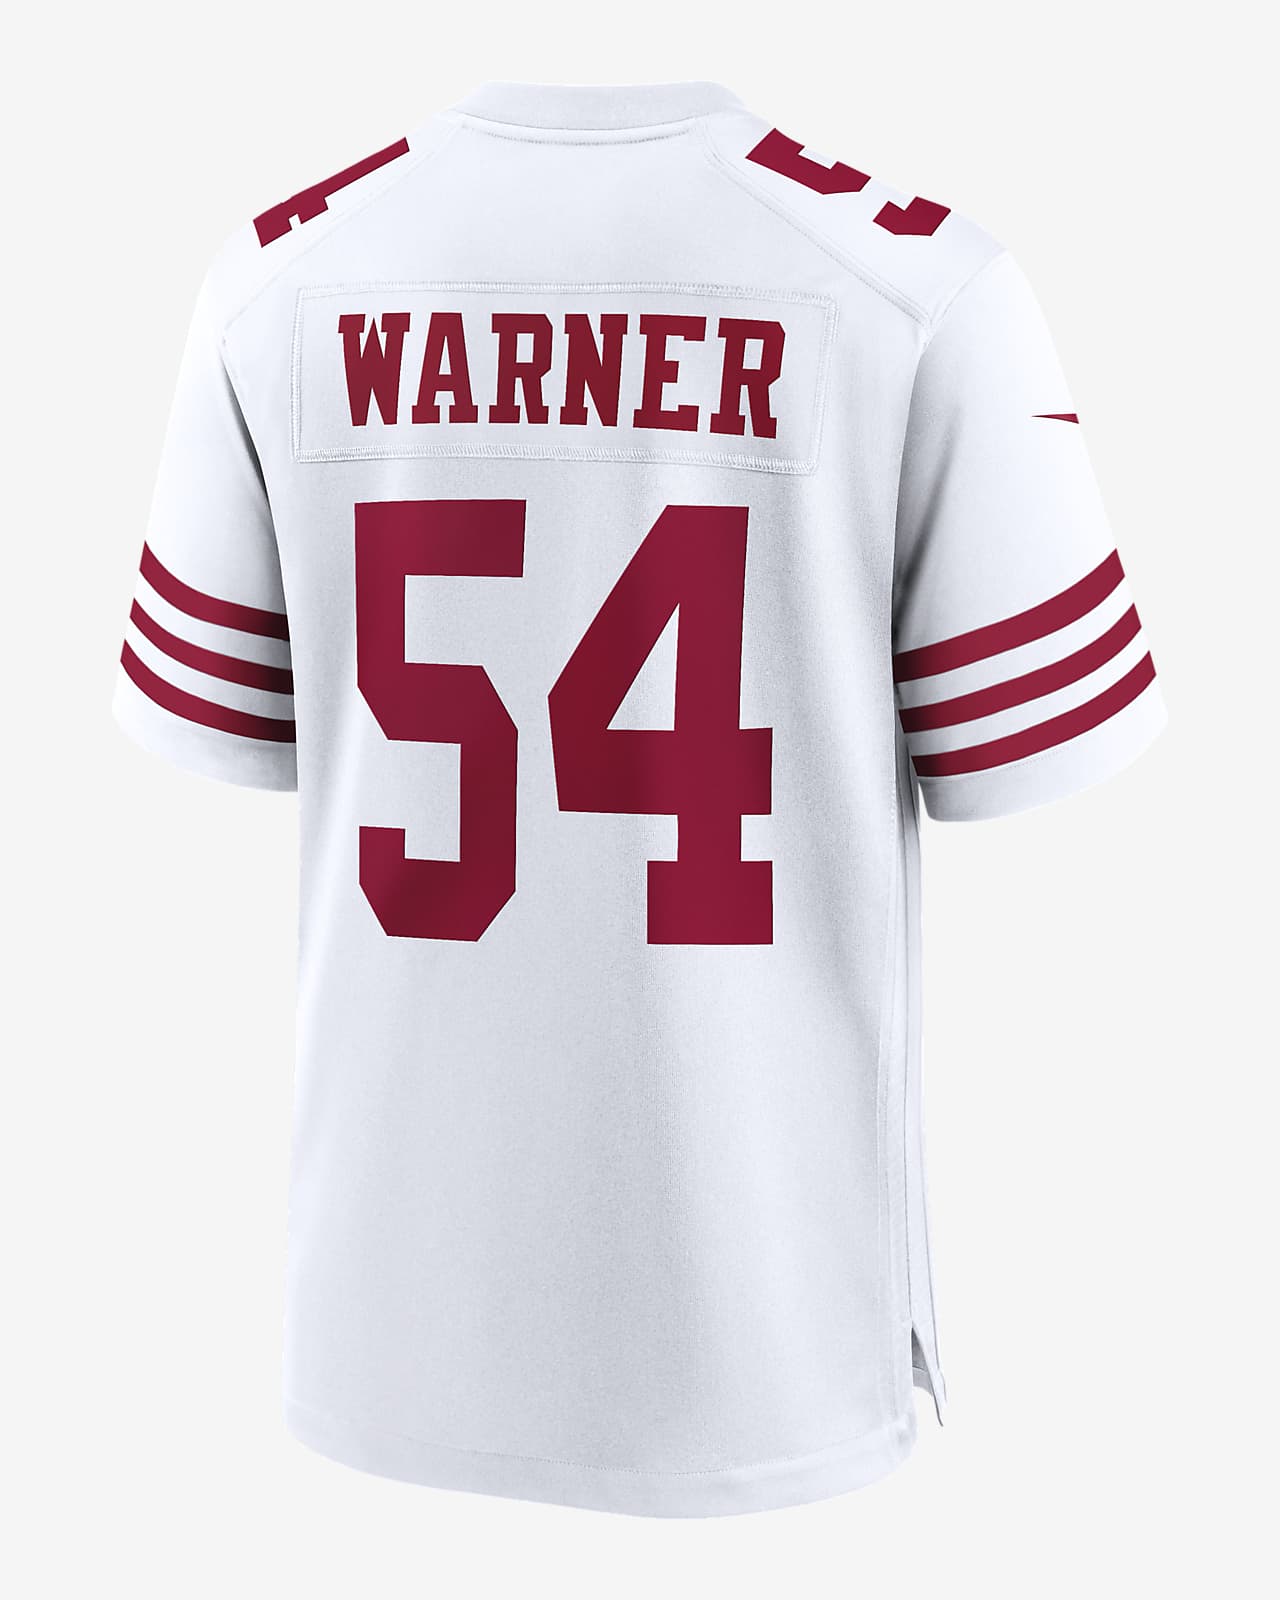 san francisco 49ers jersey youth